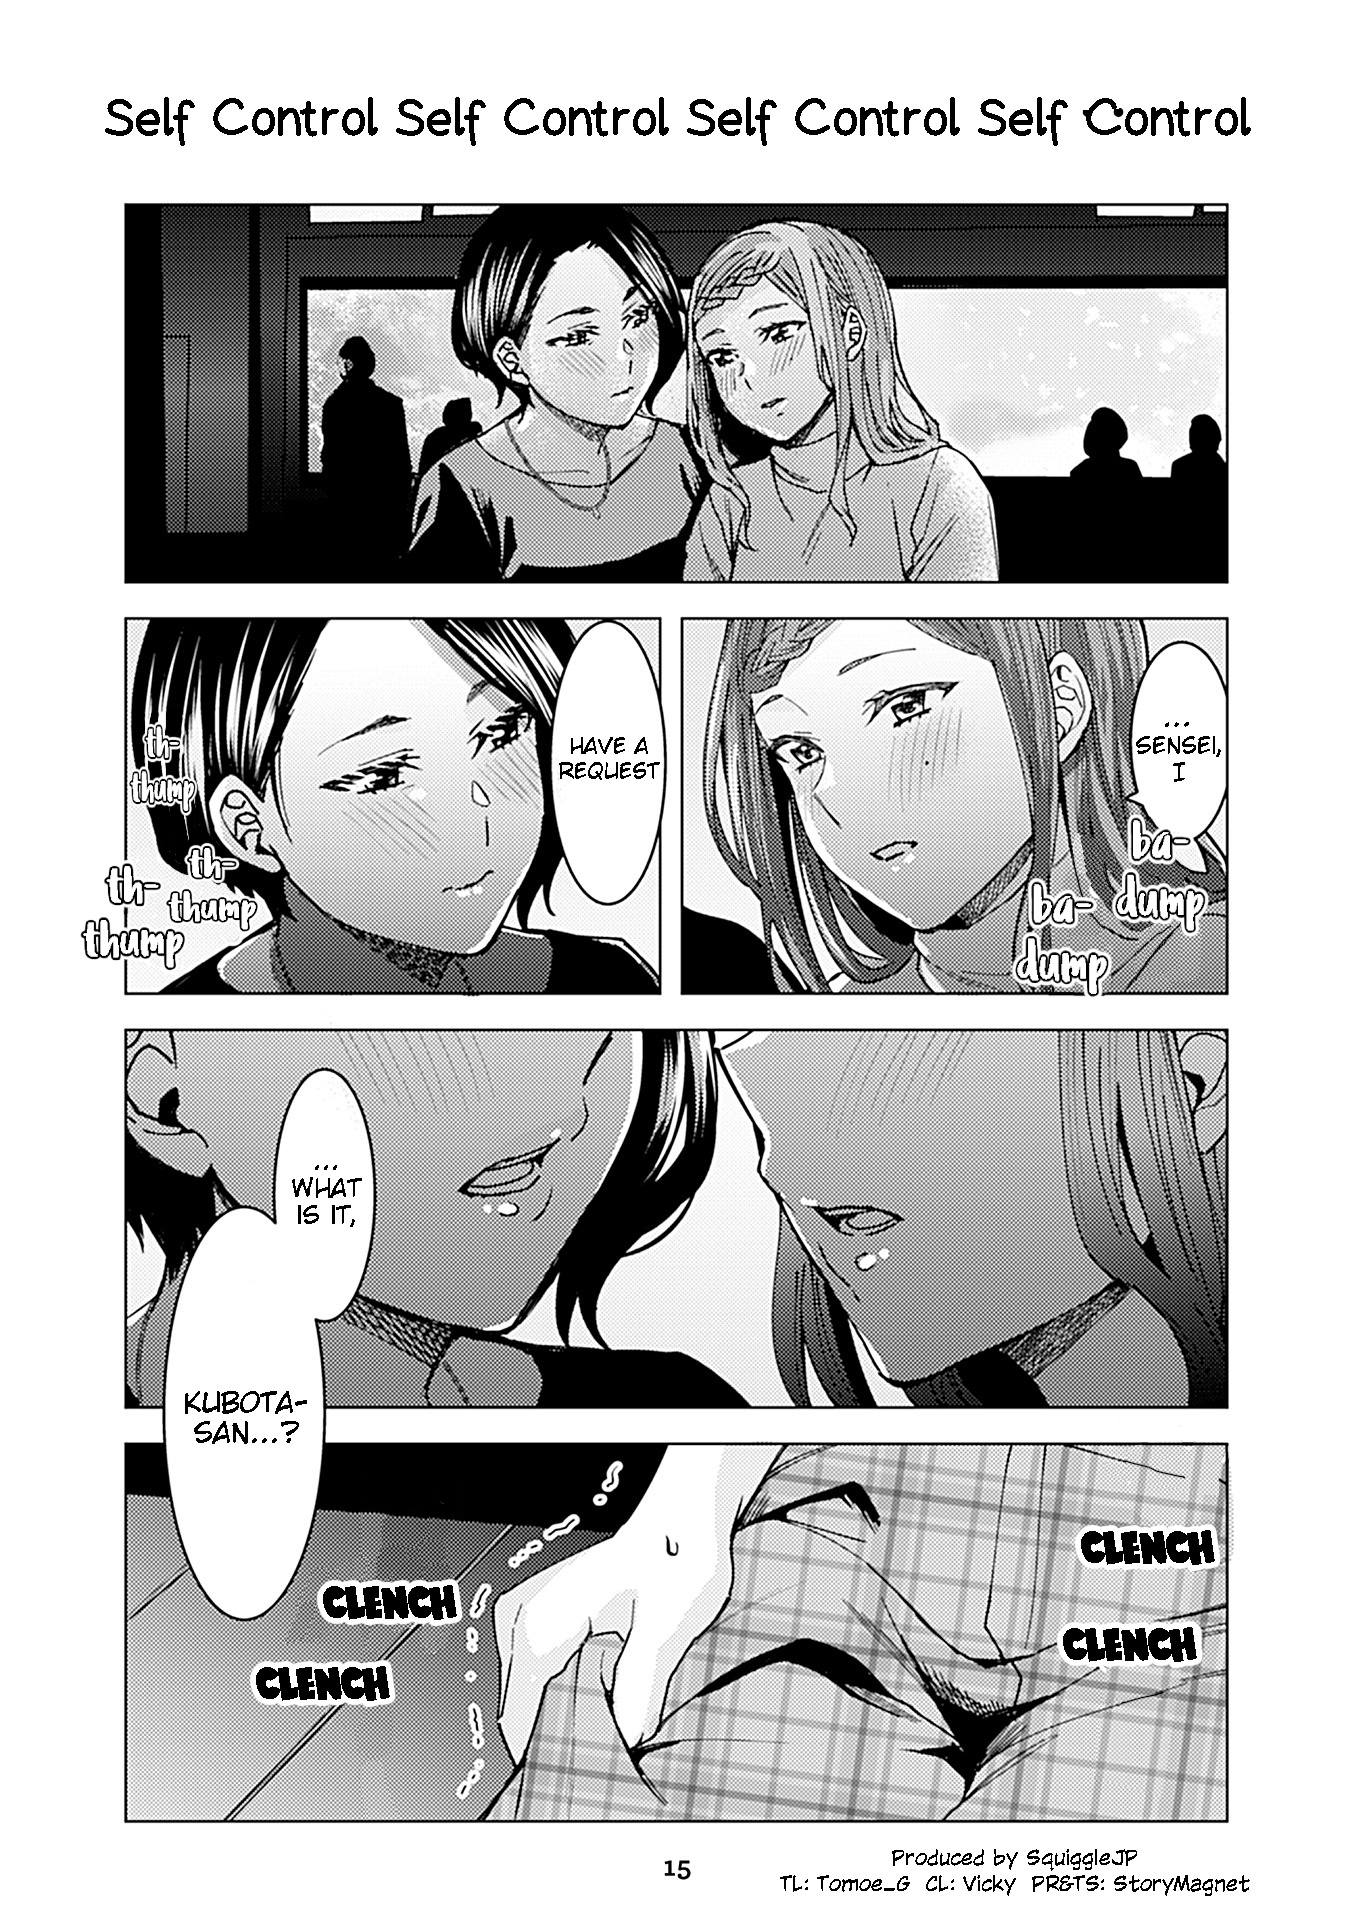 Kusanagi-Sensei Is Being Tested Vol.3 Chapter 251: Self Control Self Control Self Control Self Control - Picture 1